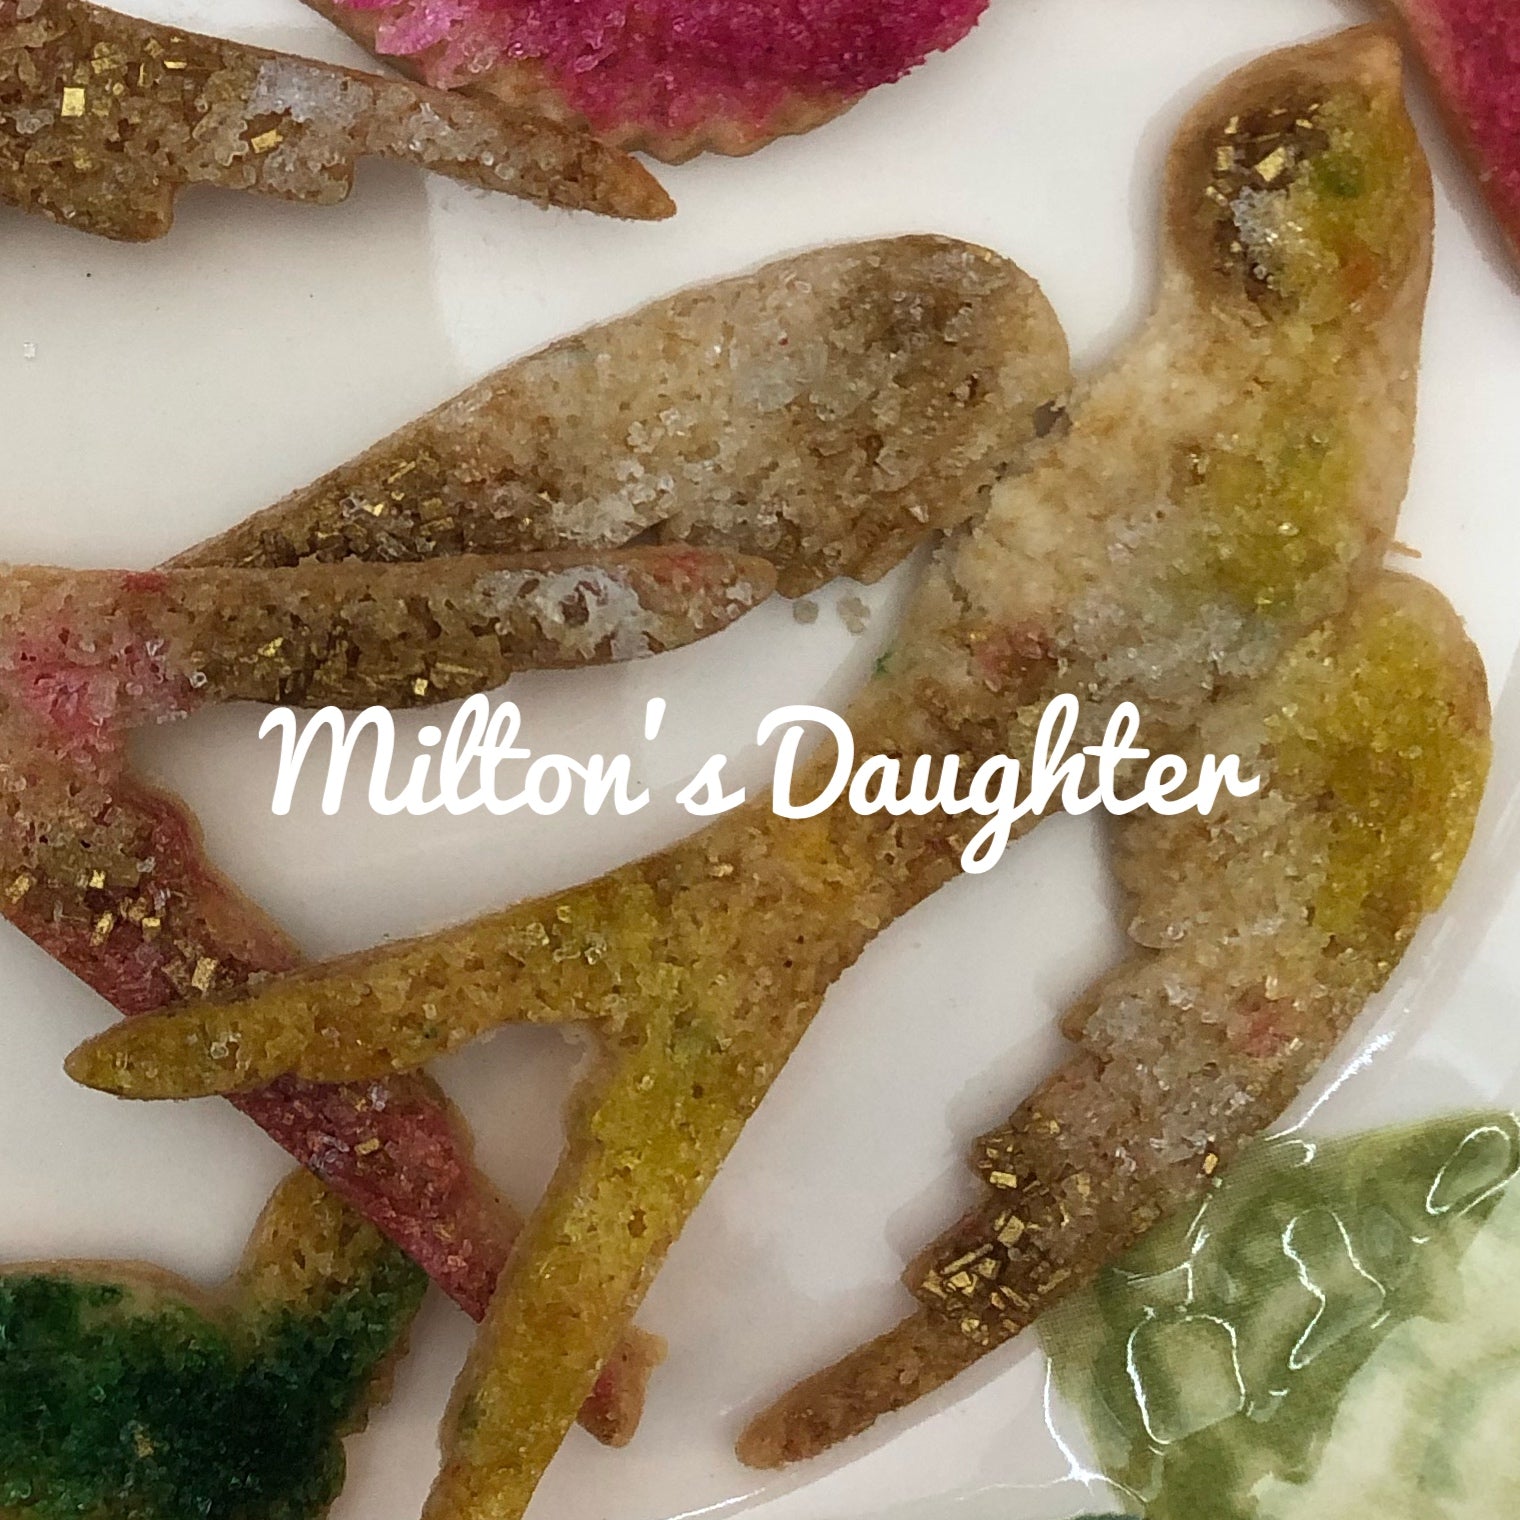 Colored sugar cookies made with IOD Birdsong Mold by Milton's Daughter